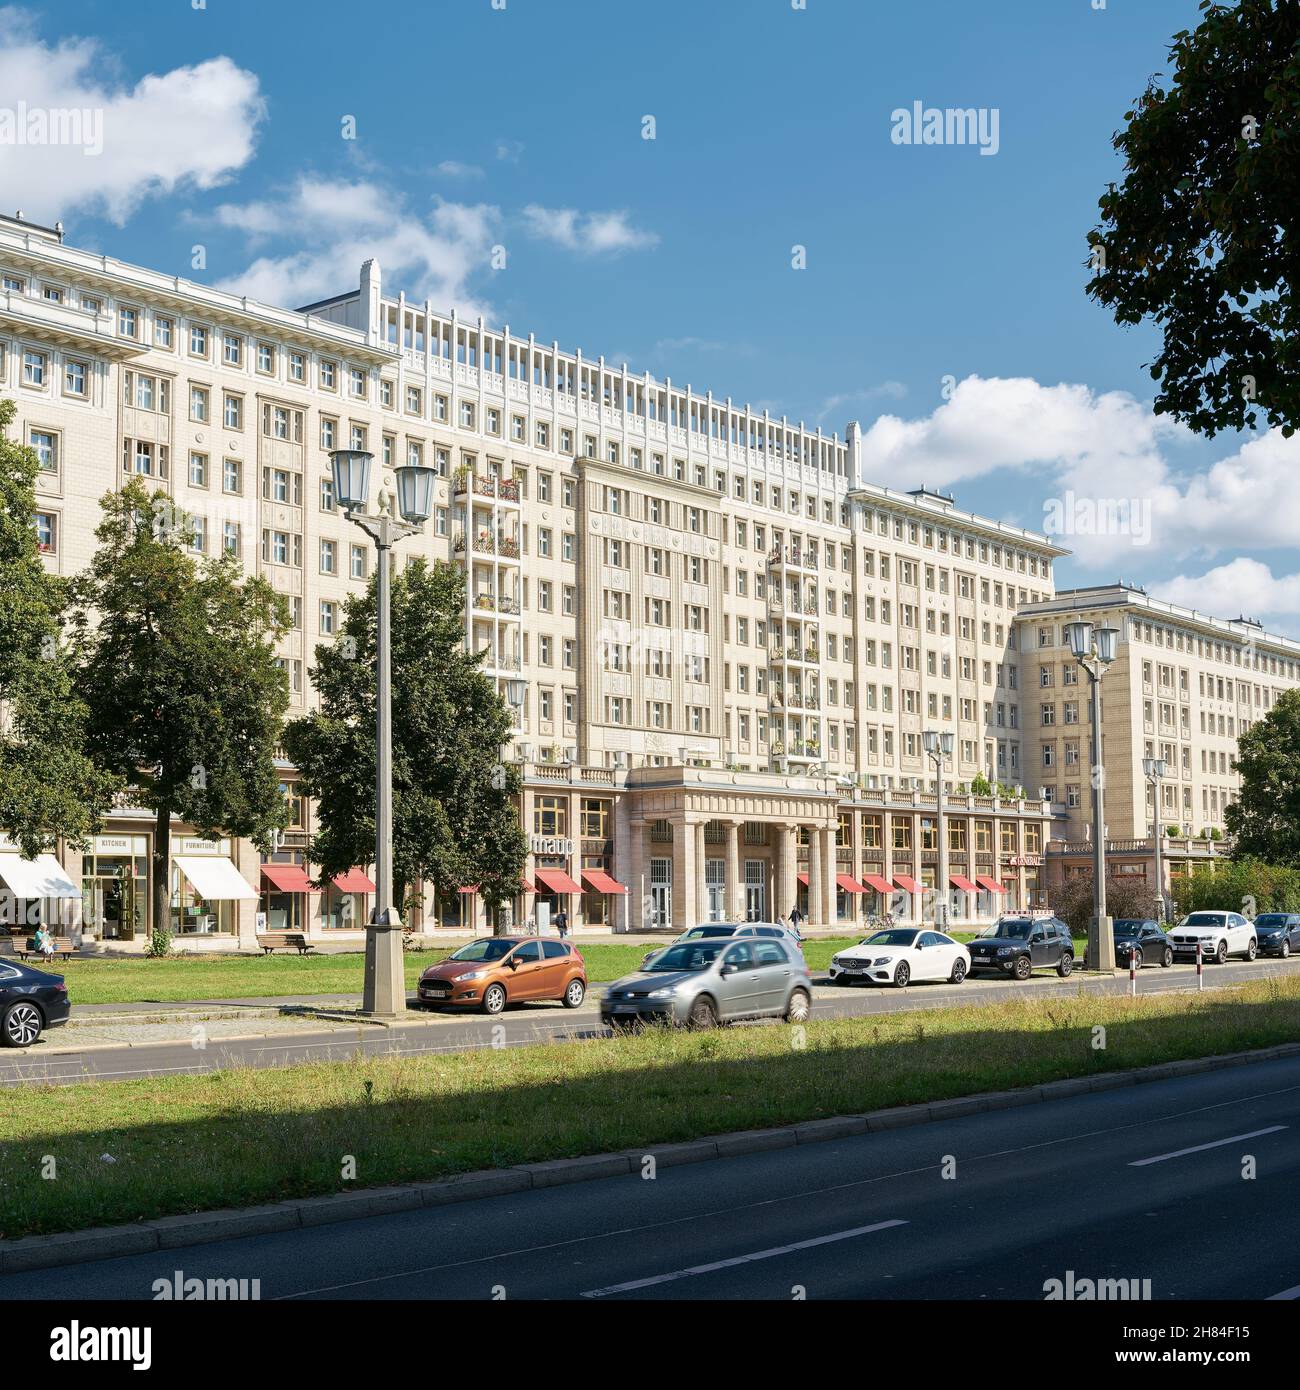 Stores and apartments in Karl-Marx-Allee in the center of Berlin. Karl-Marx-Allee was the boulevard of the former GDR. Stock Photo